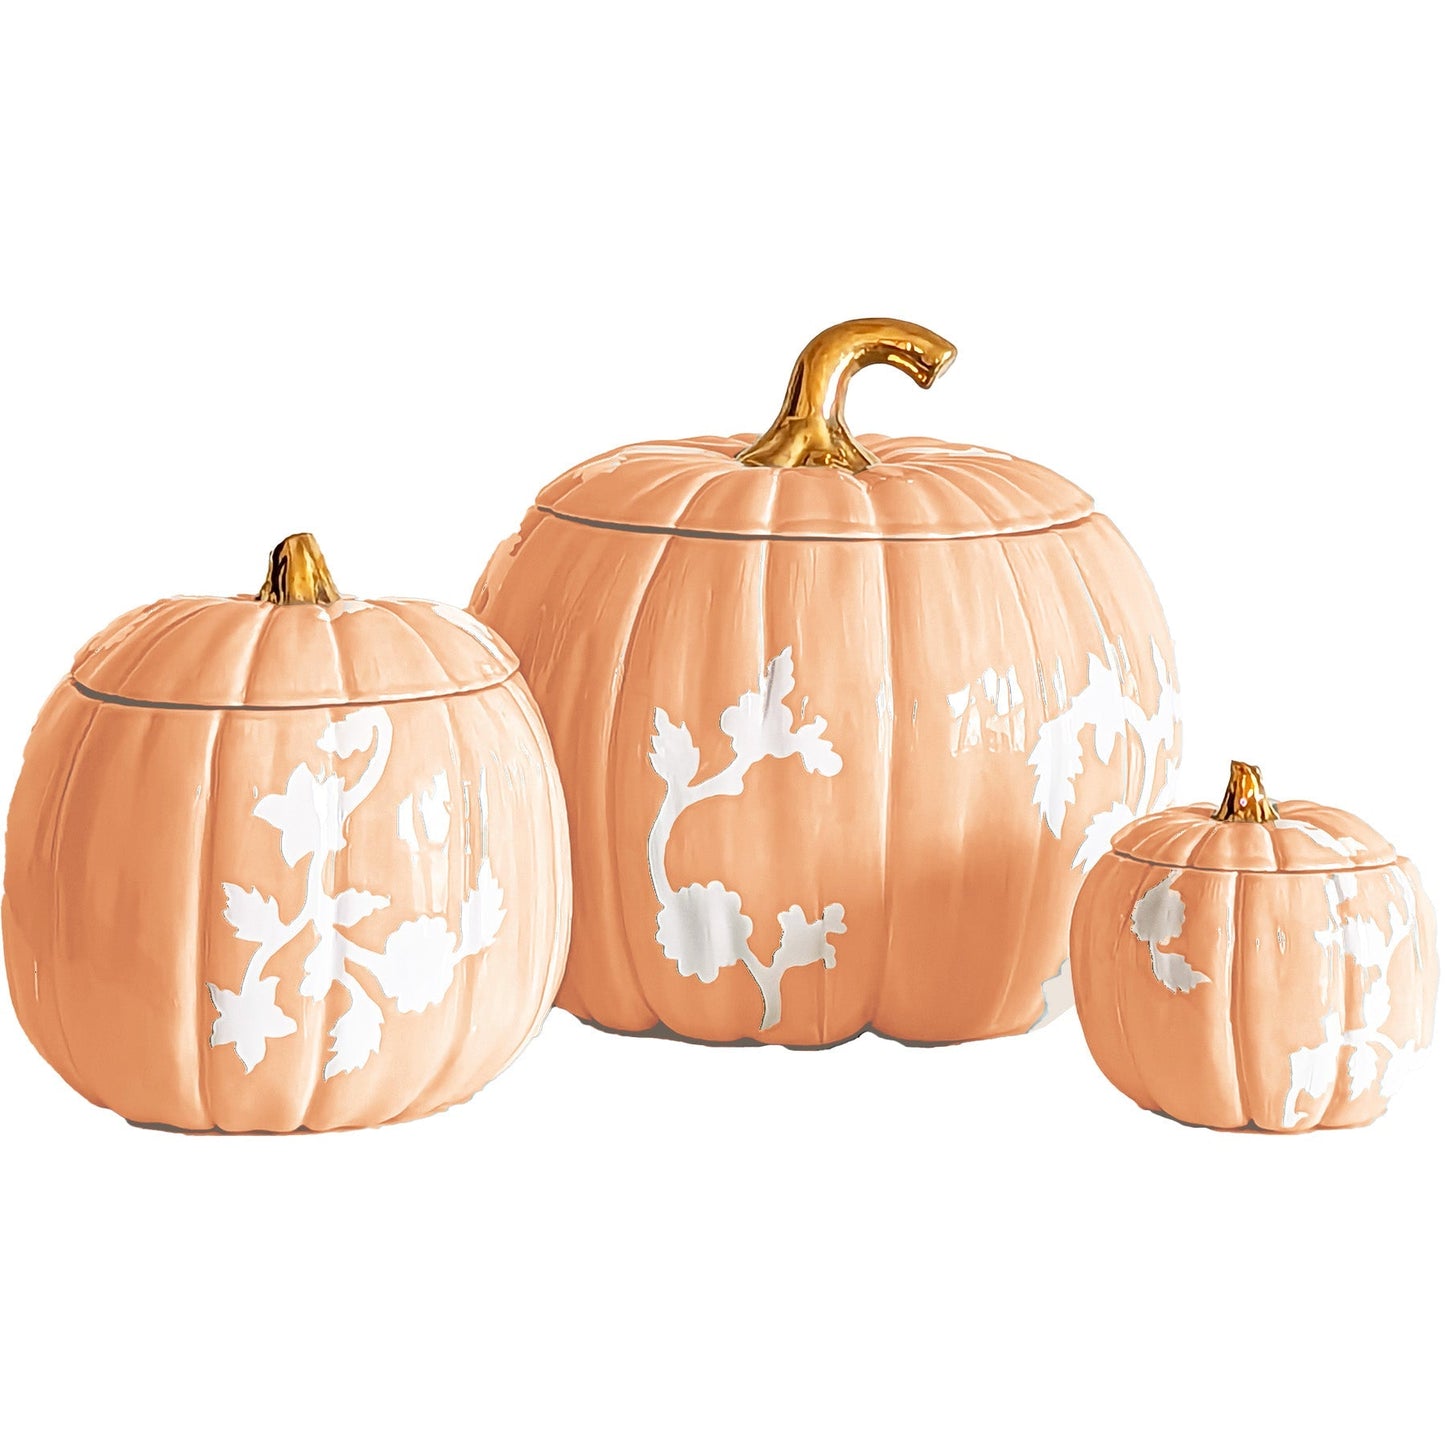 Chinoiserie Pumpkin Jars with 22K Gold Accents in Sheer Orange | Wholesale